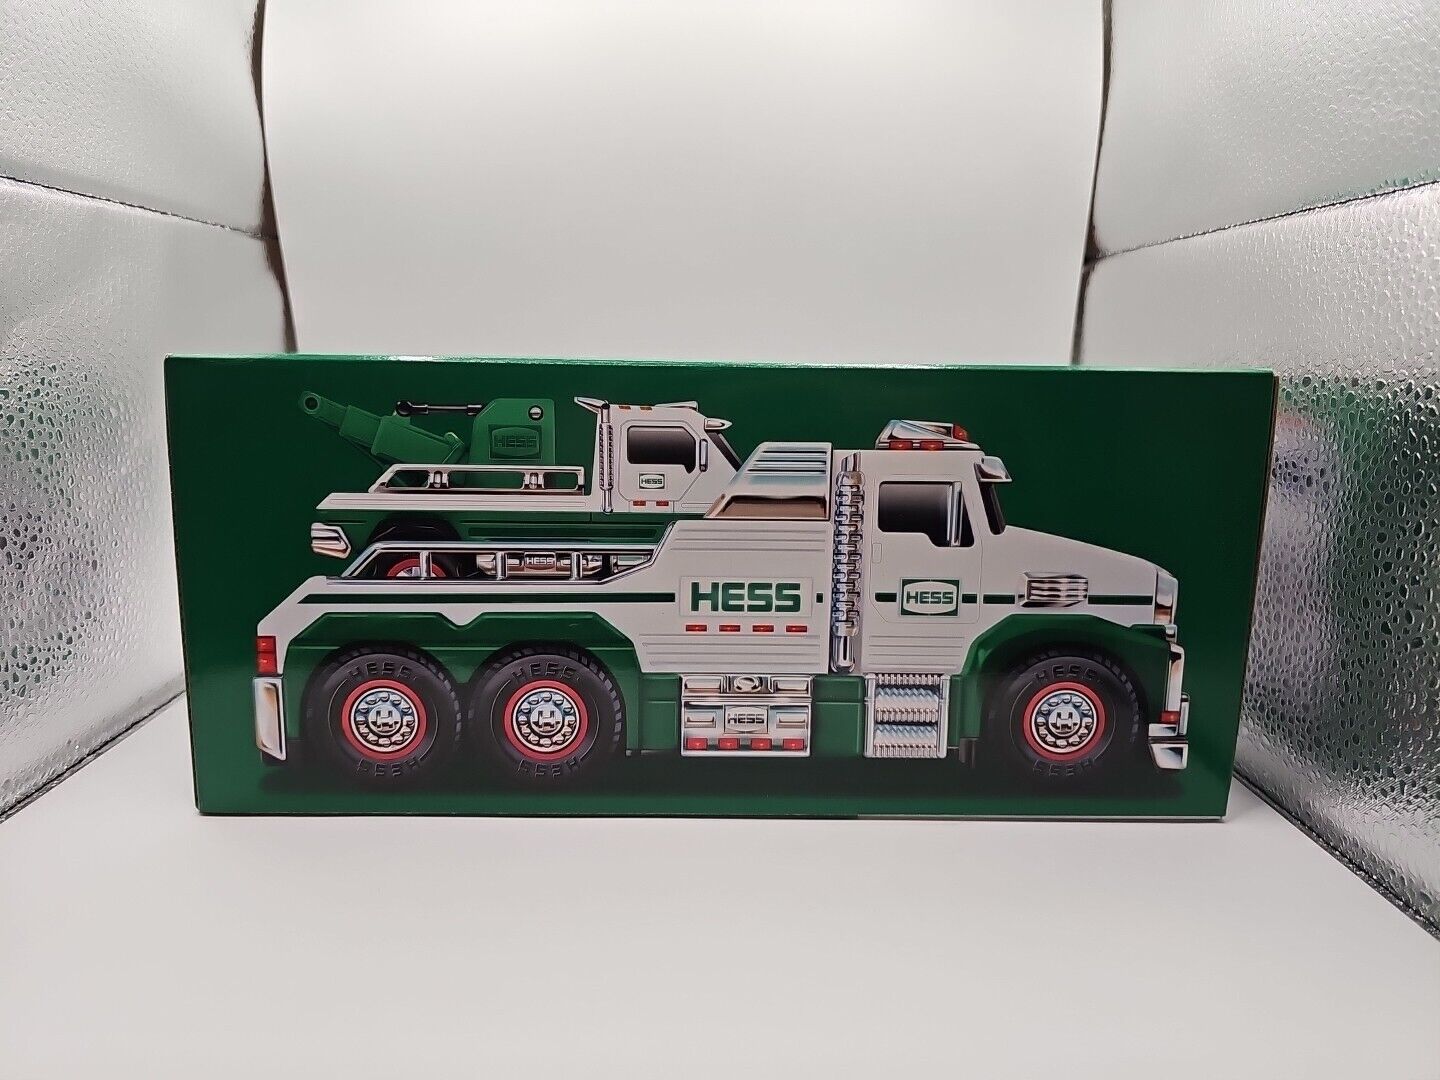 2019 Hess Tow Truck Rescue Team New In Box With Original  Brown Box. 